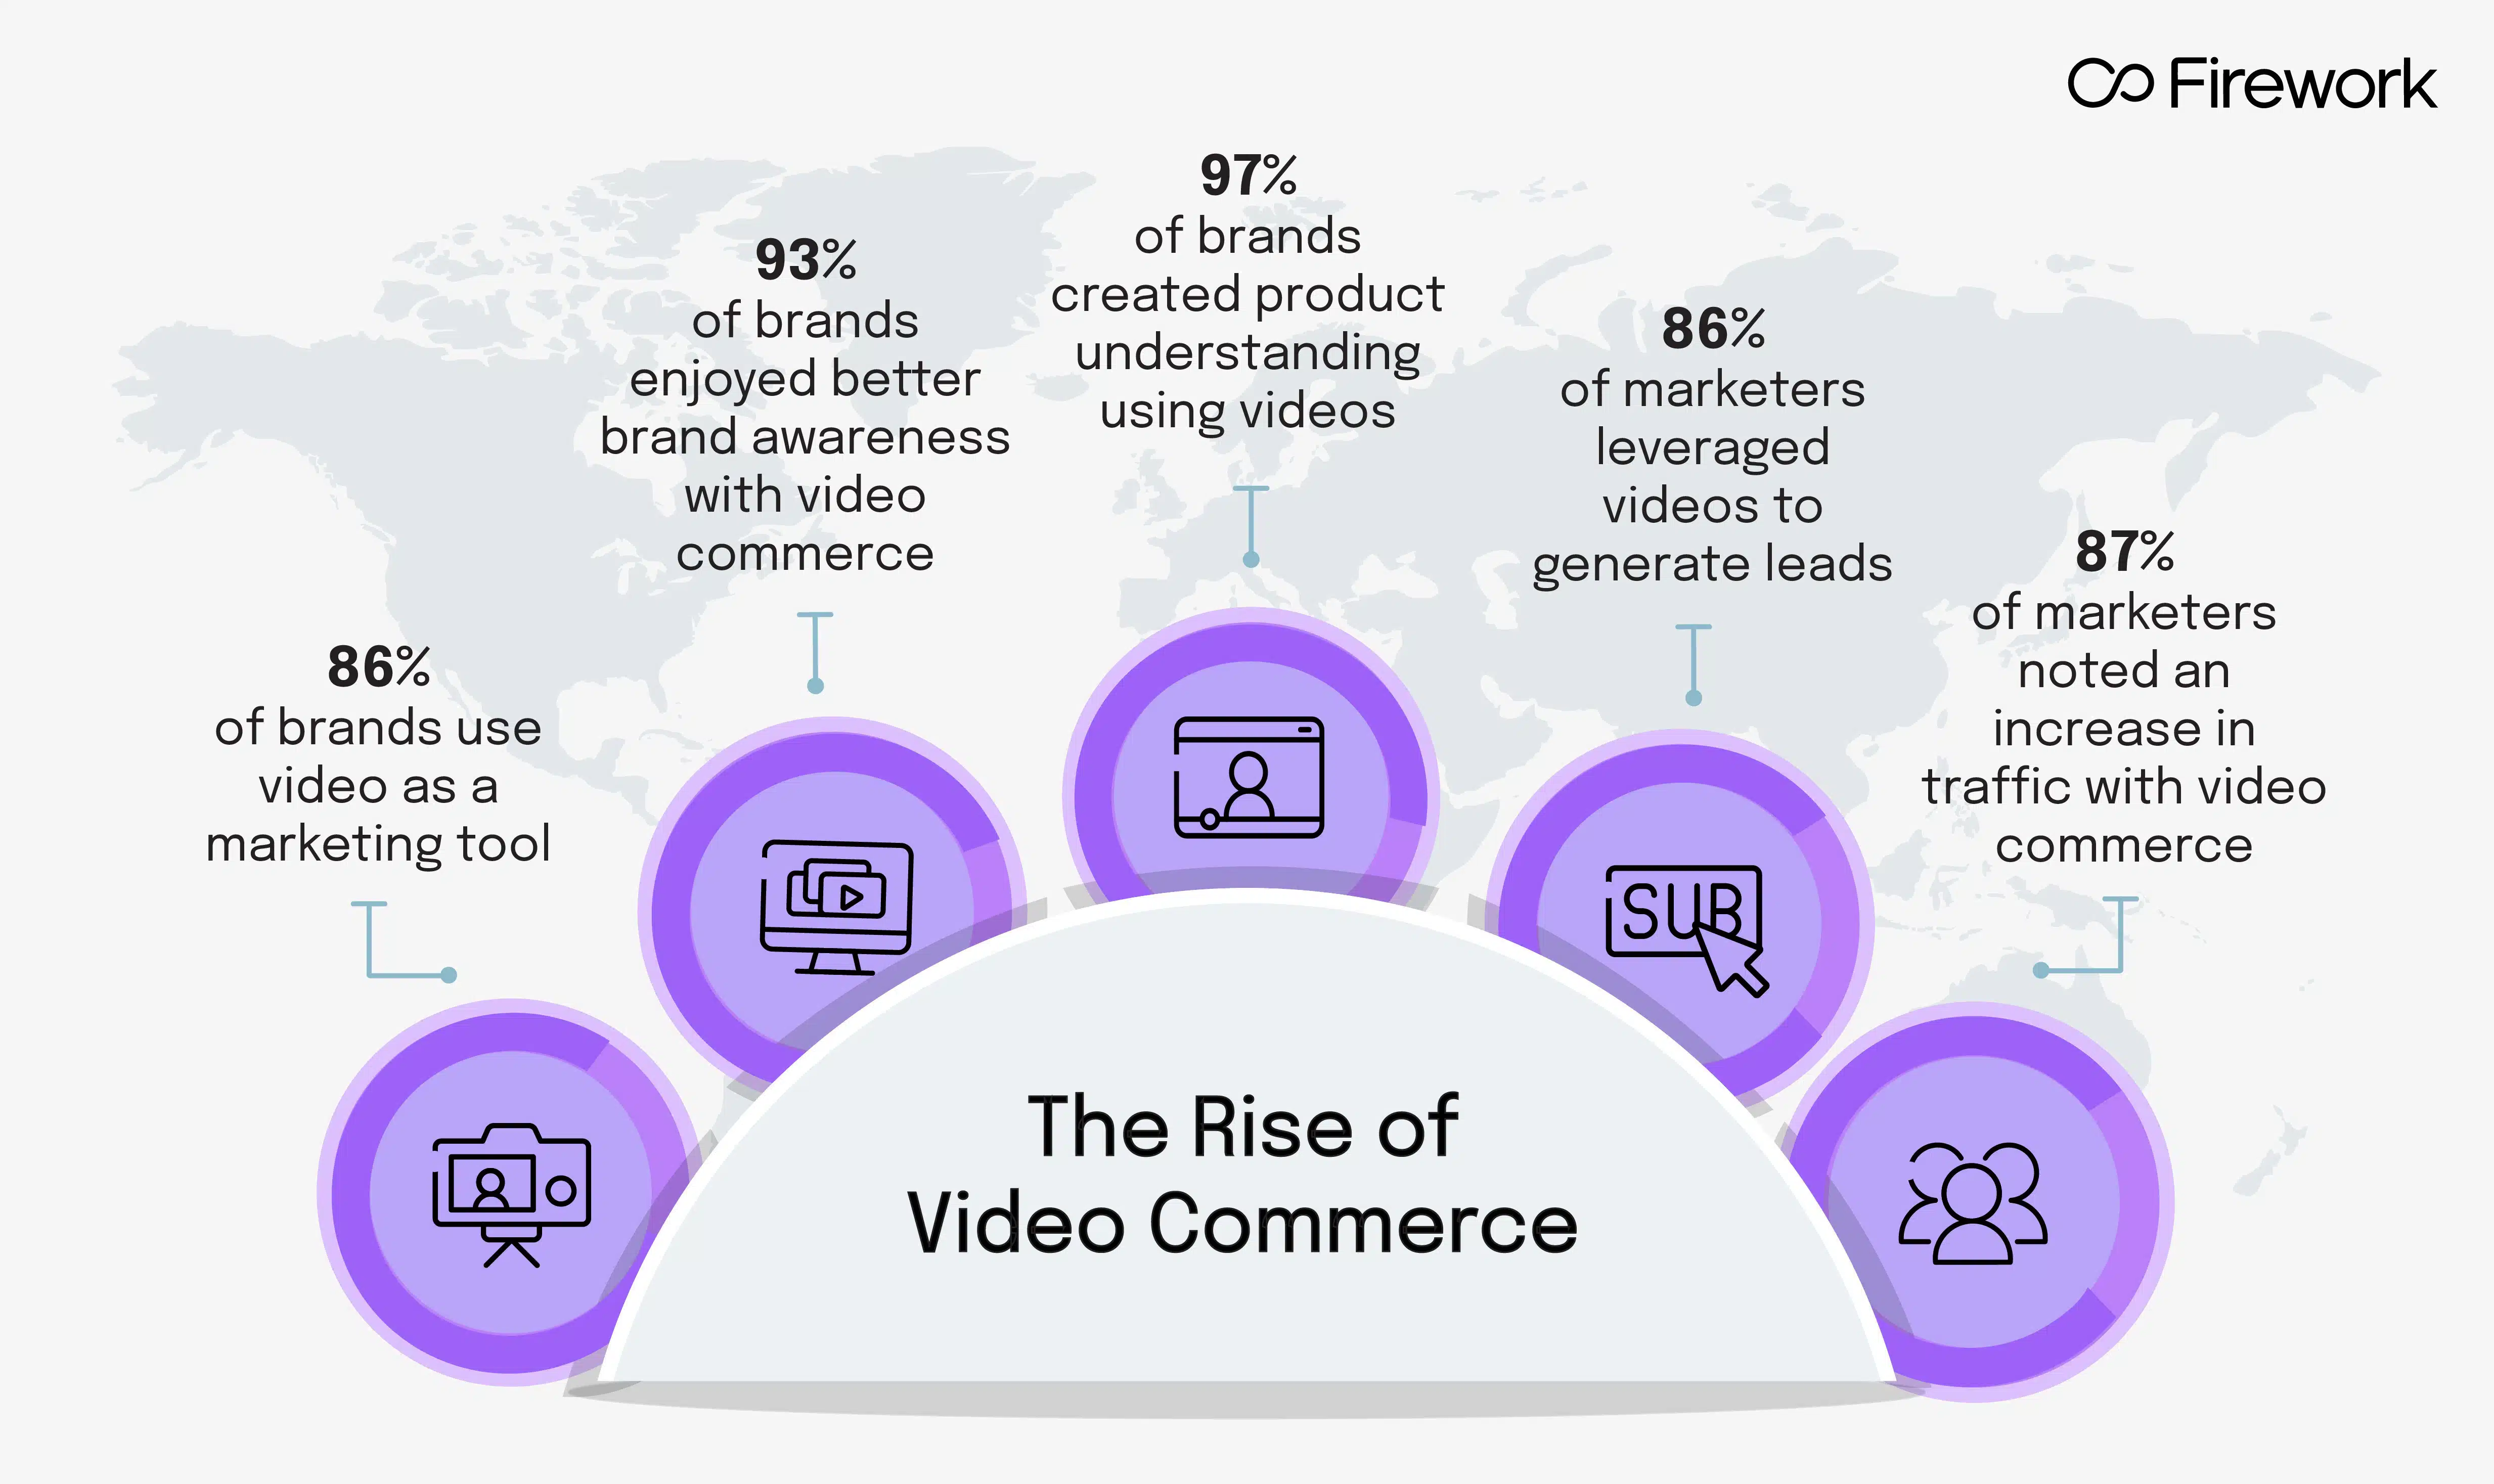 The Rise of Video Commerce